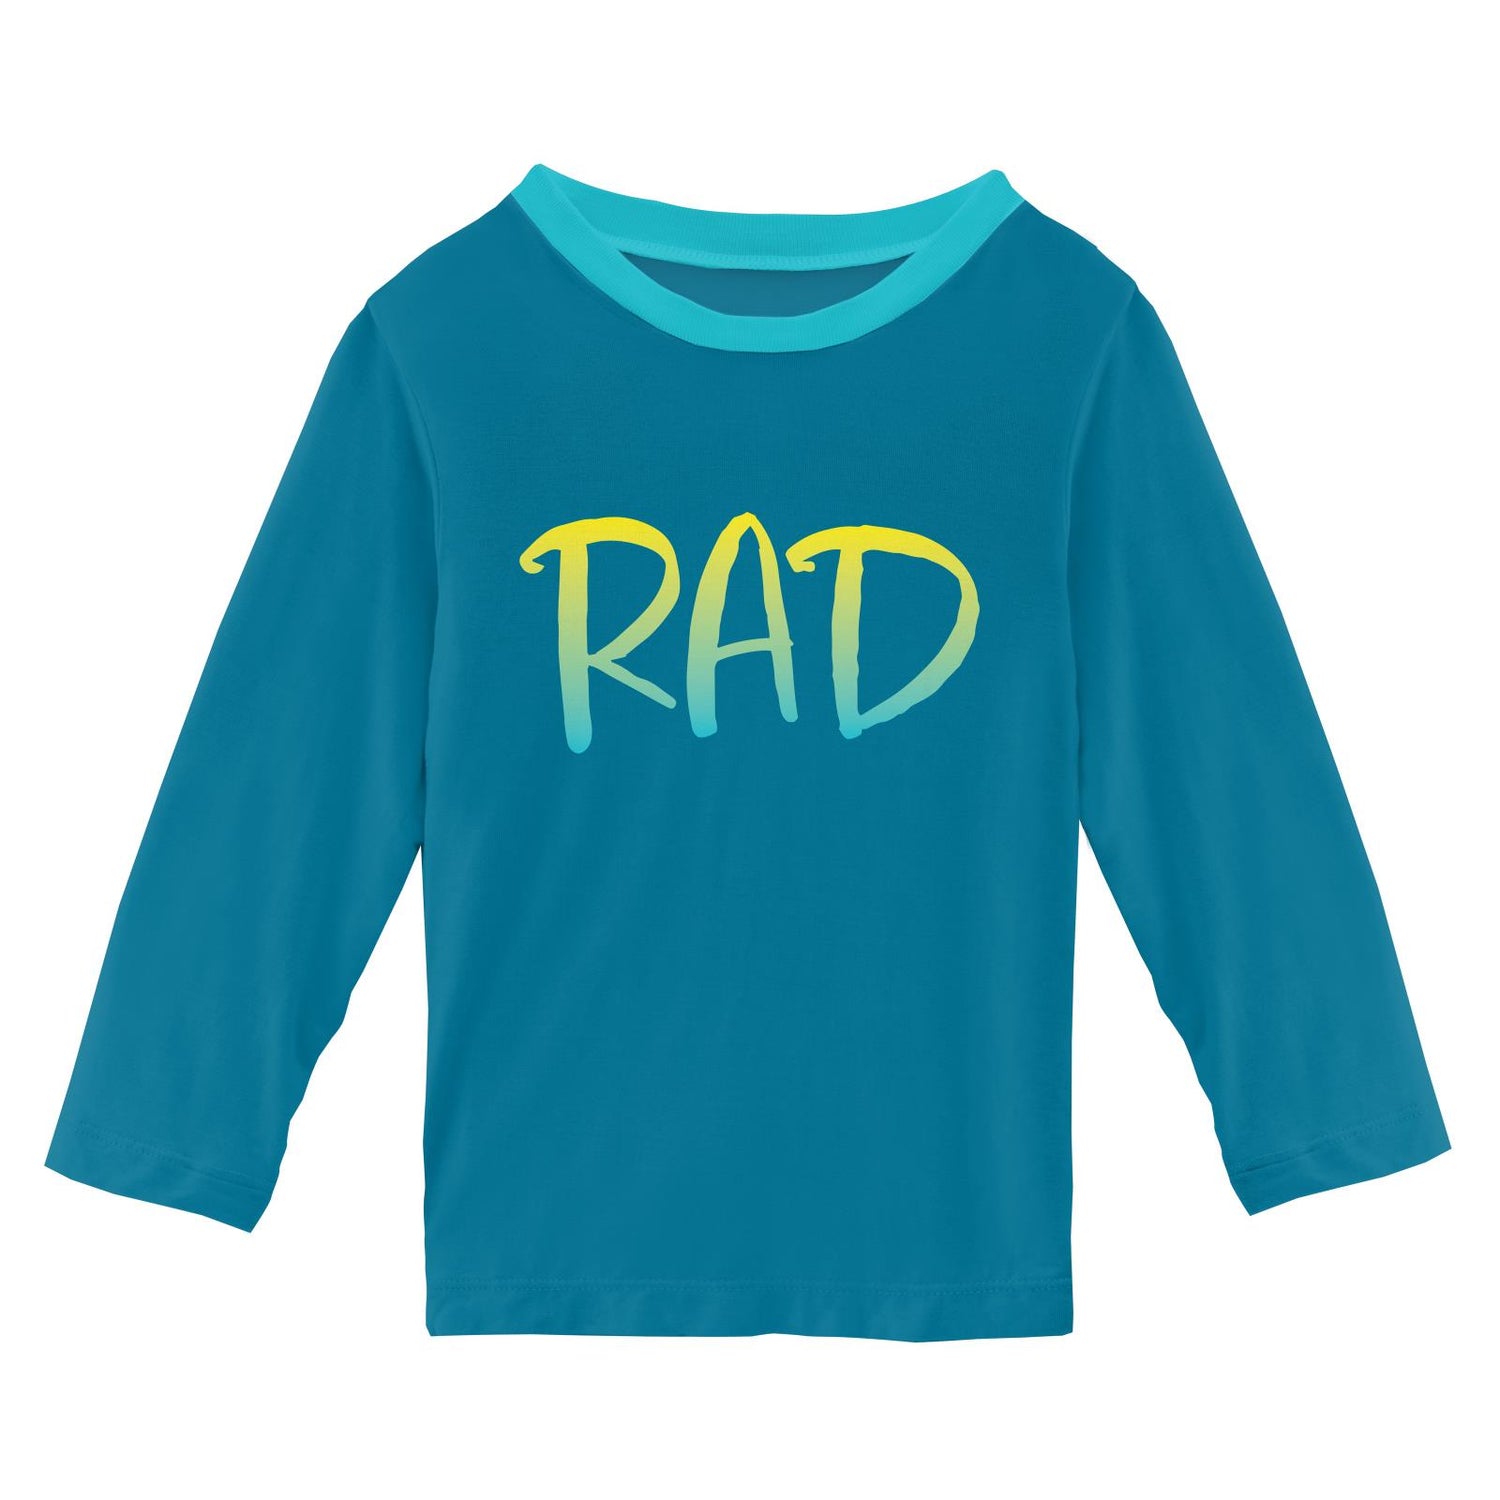 Long Sleeve Easy Fit Crew Neck Graphic Tee in Cerulean Blue RAD